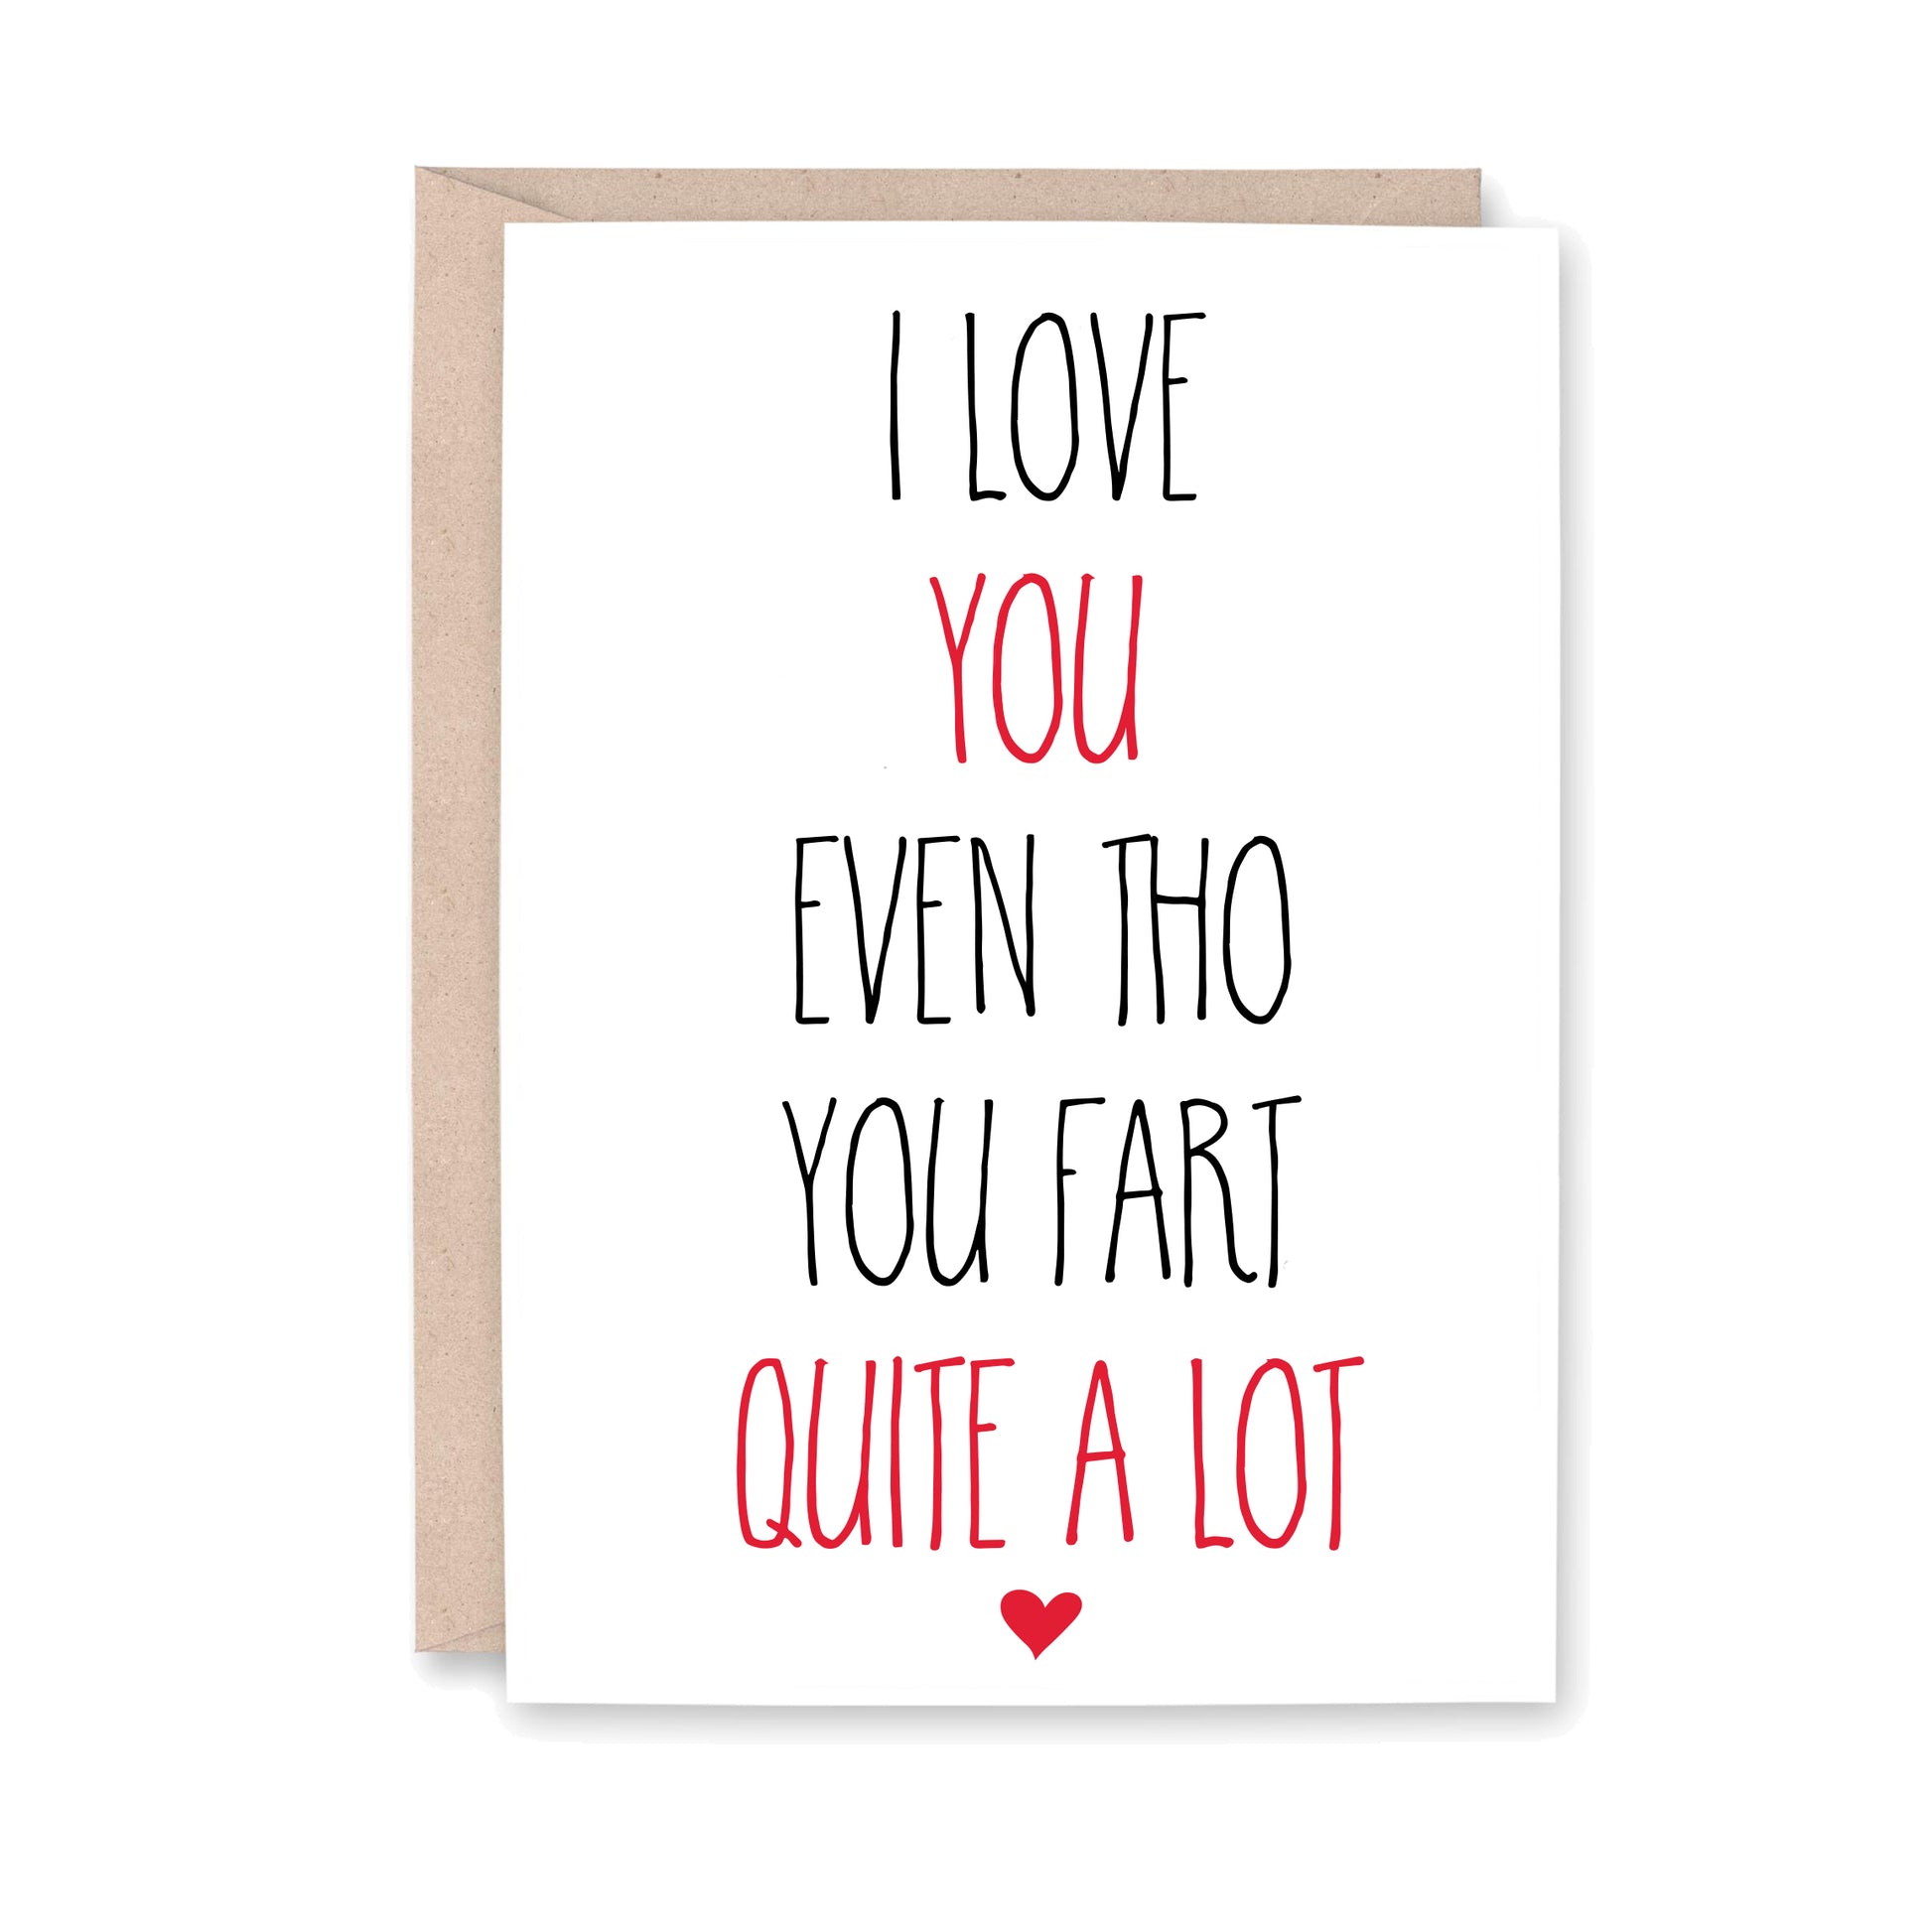 I love you even tho you fart quite a lot - greeting card